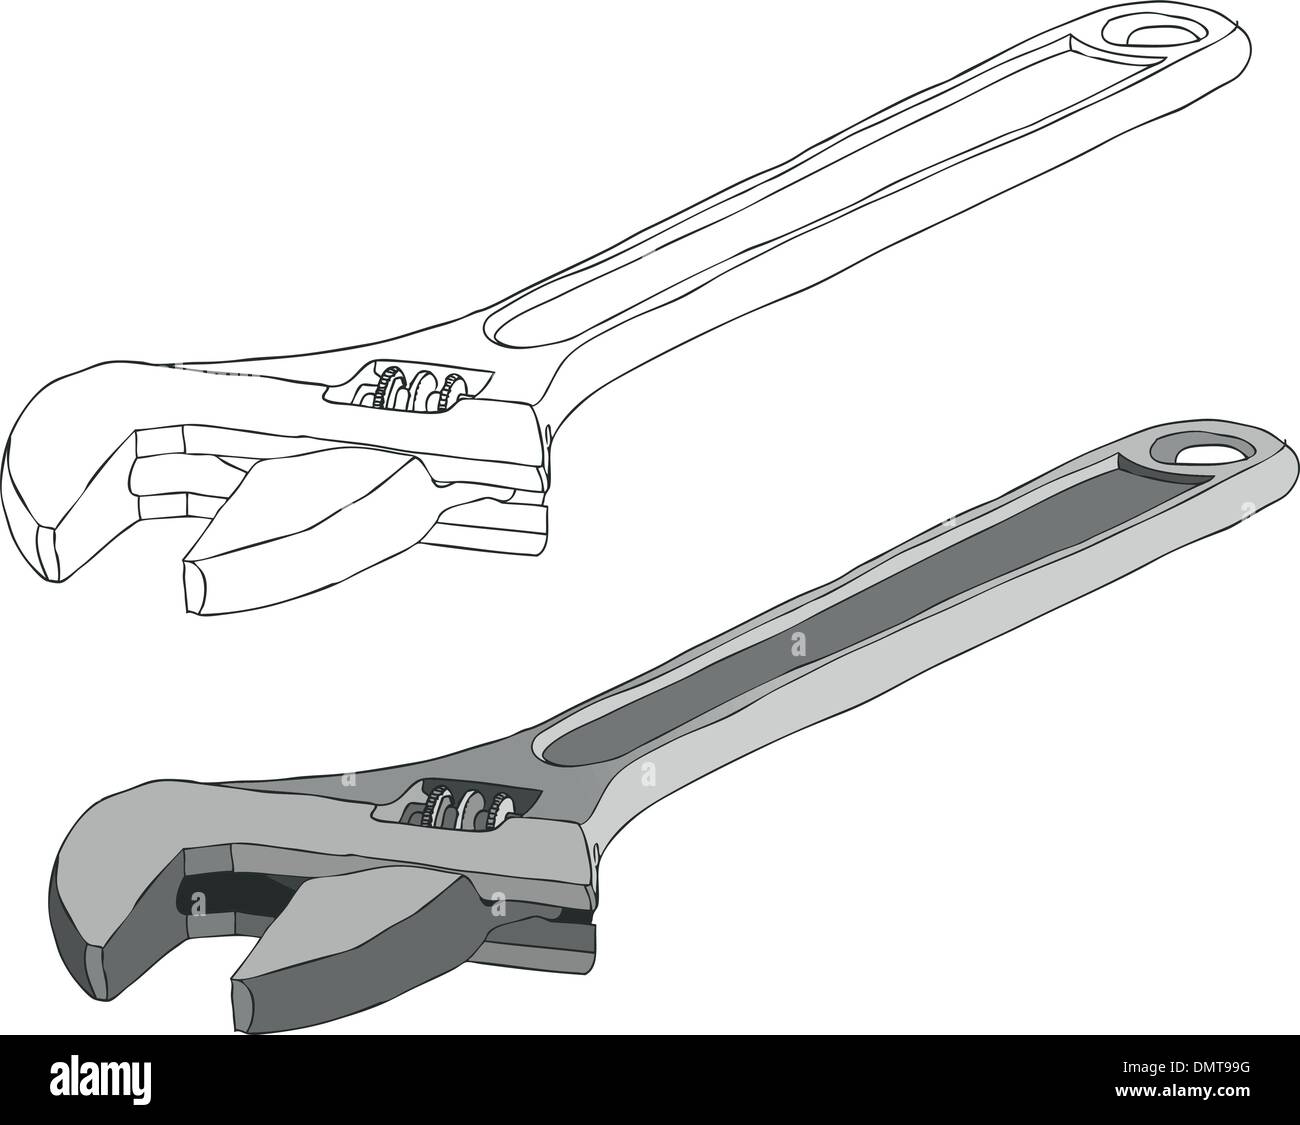 Adjustable Wrench Drawing Stock Illustrations – 800 Adjustable Wrench  Drawing Stock Illustrations, Vectors & Clipart - Dreamstime